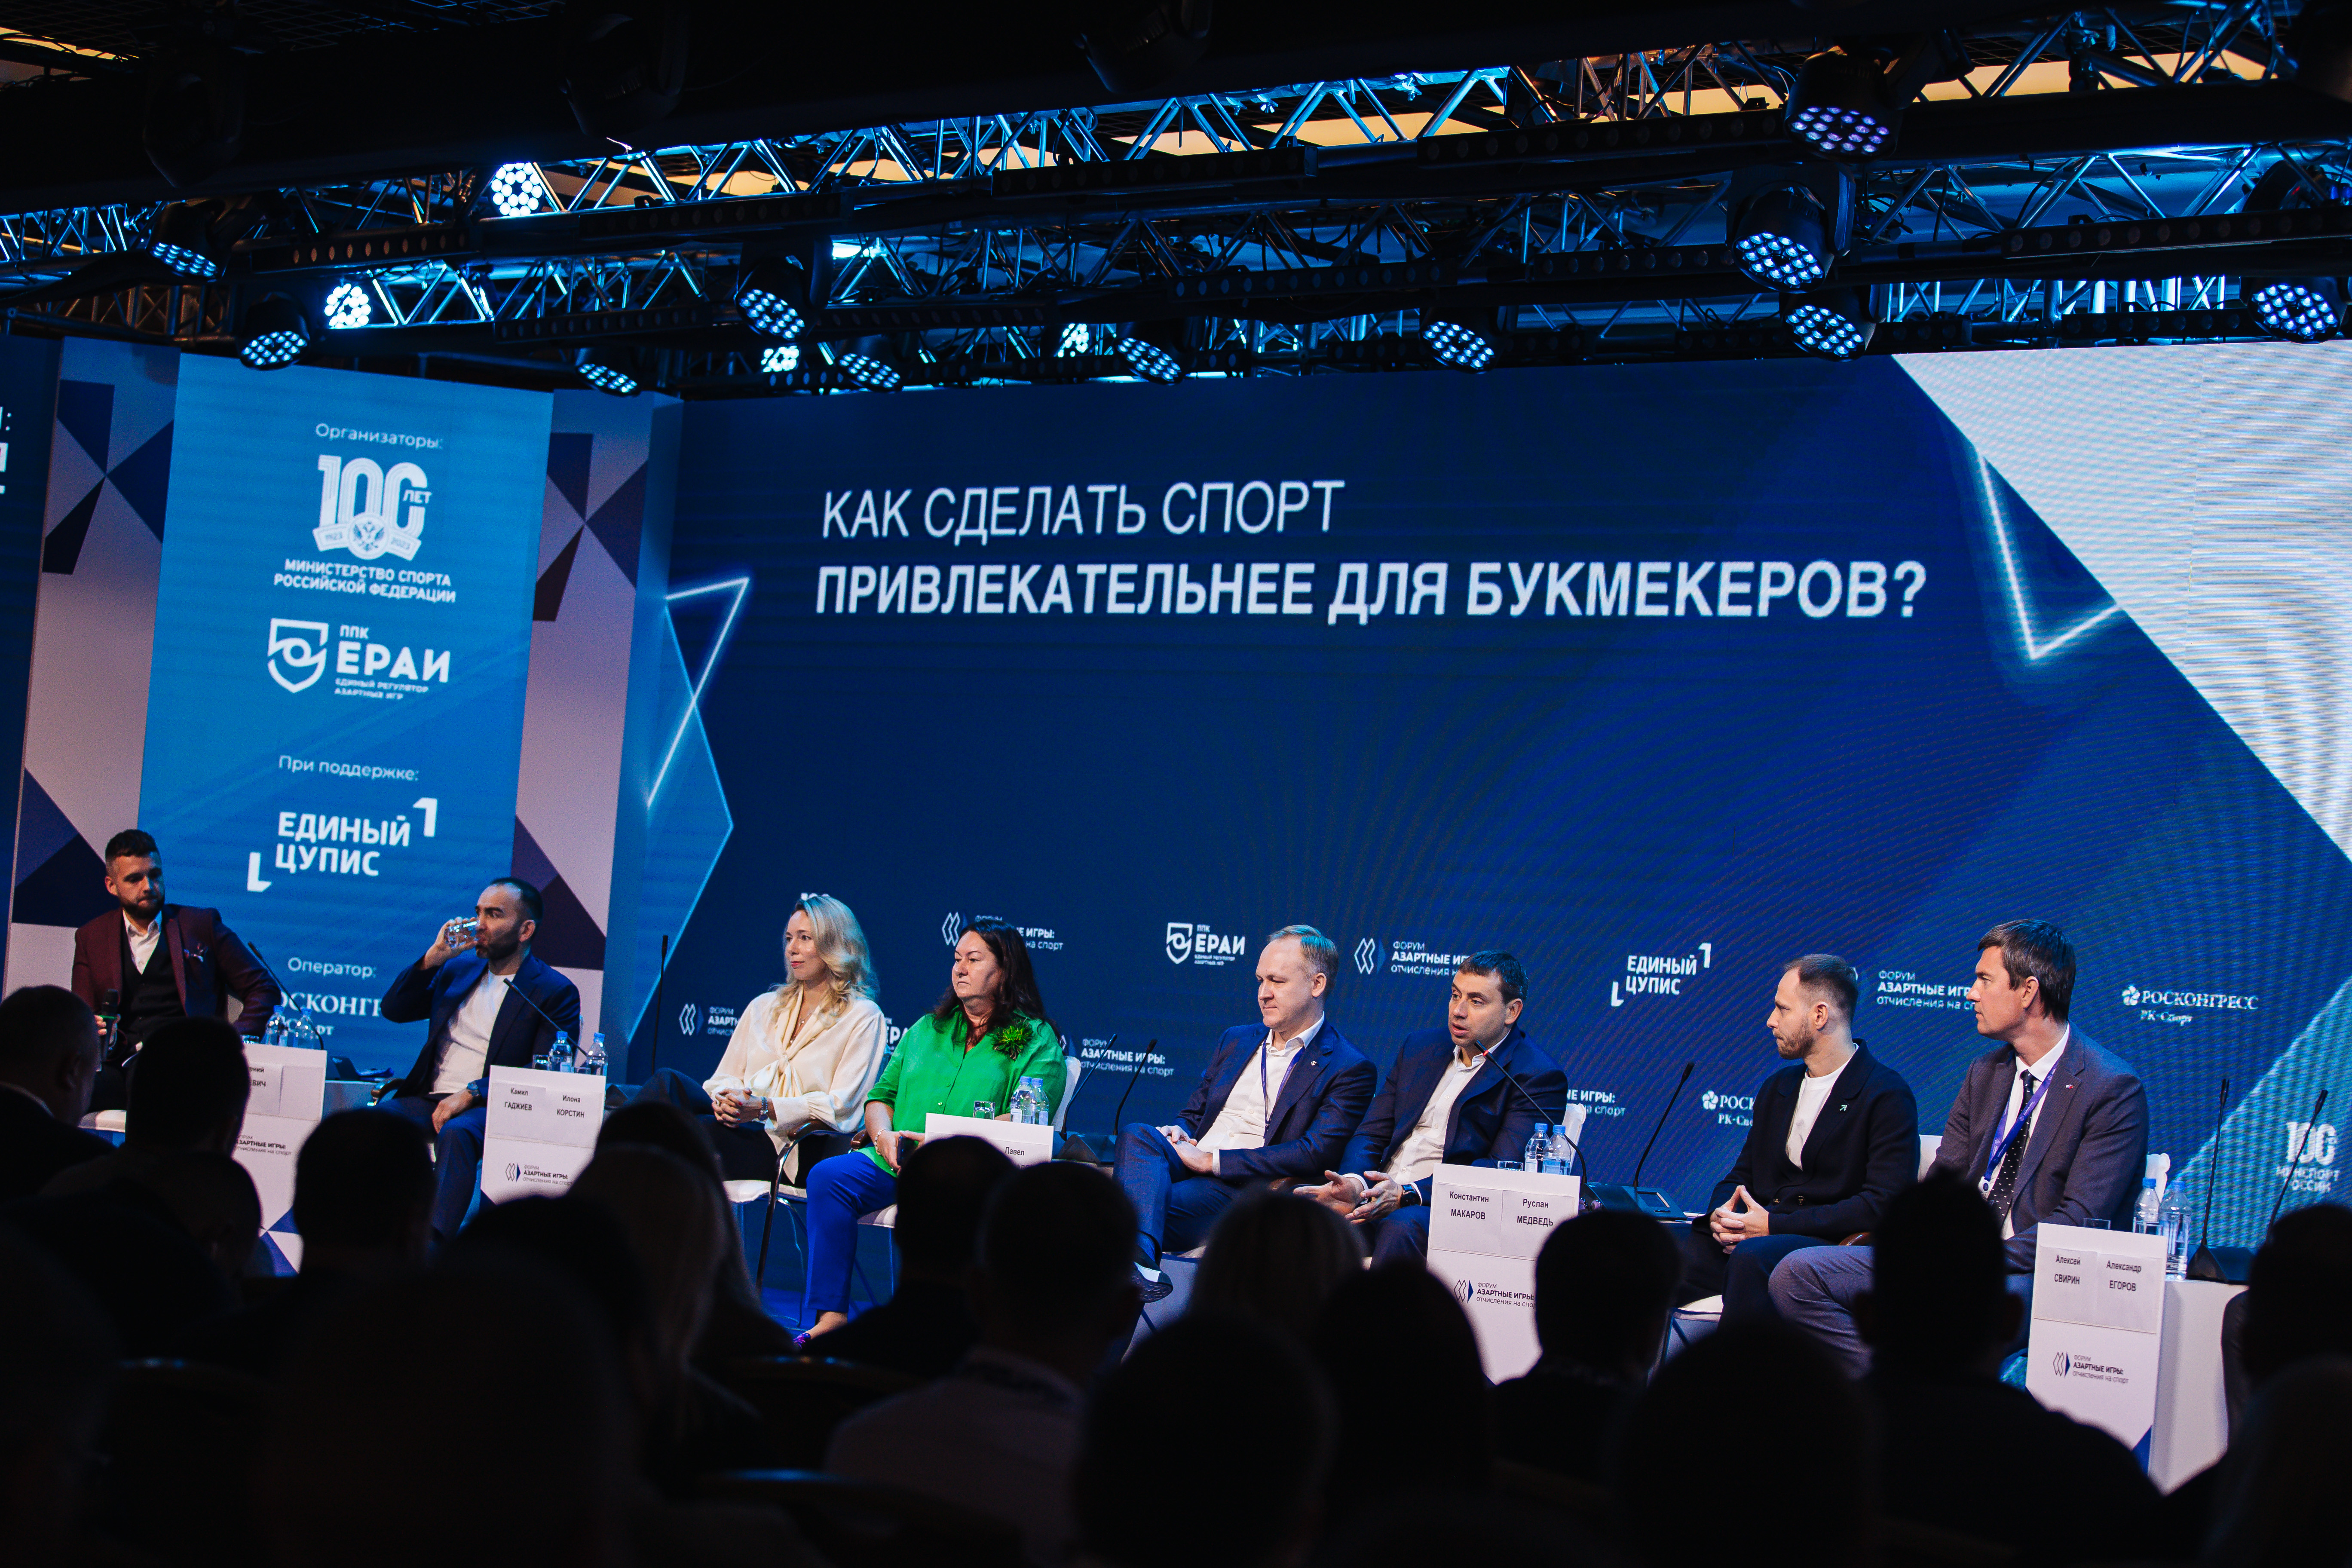 Ilona Korstin took part in the panel discussion «How to make sport more attractive for bookmakers?»